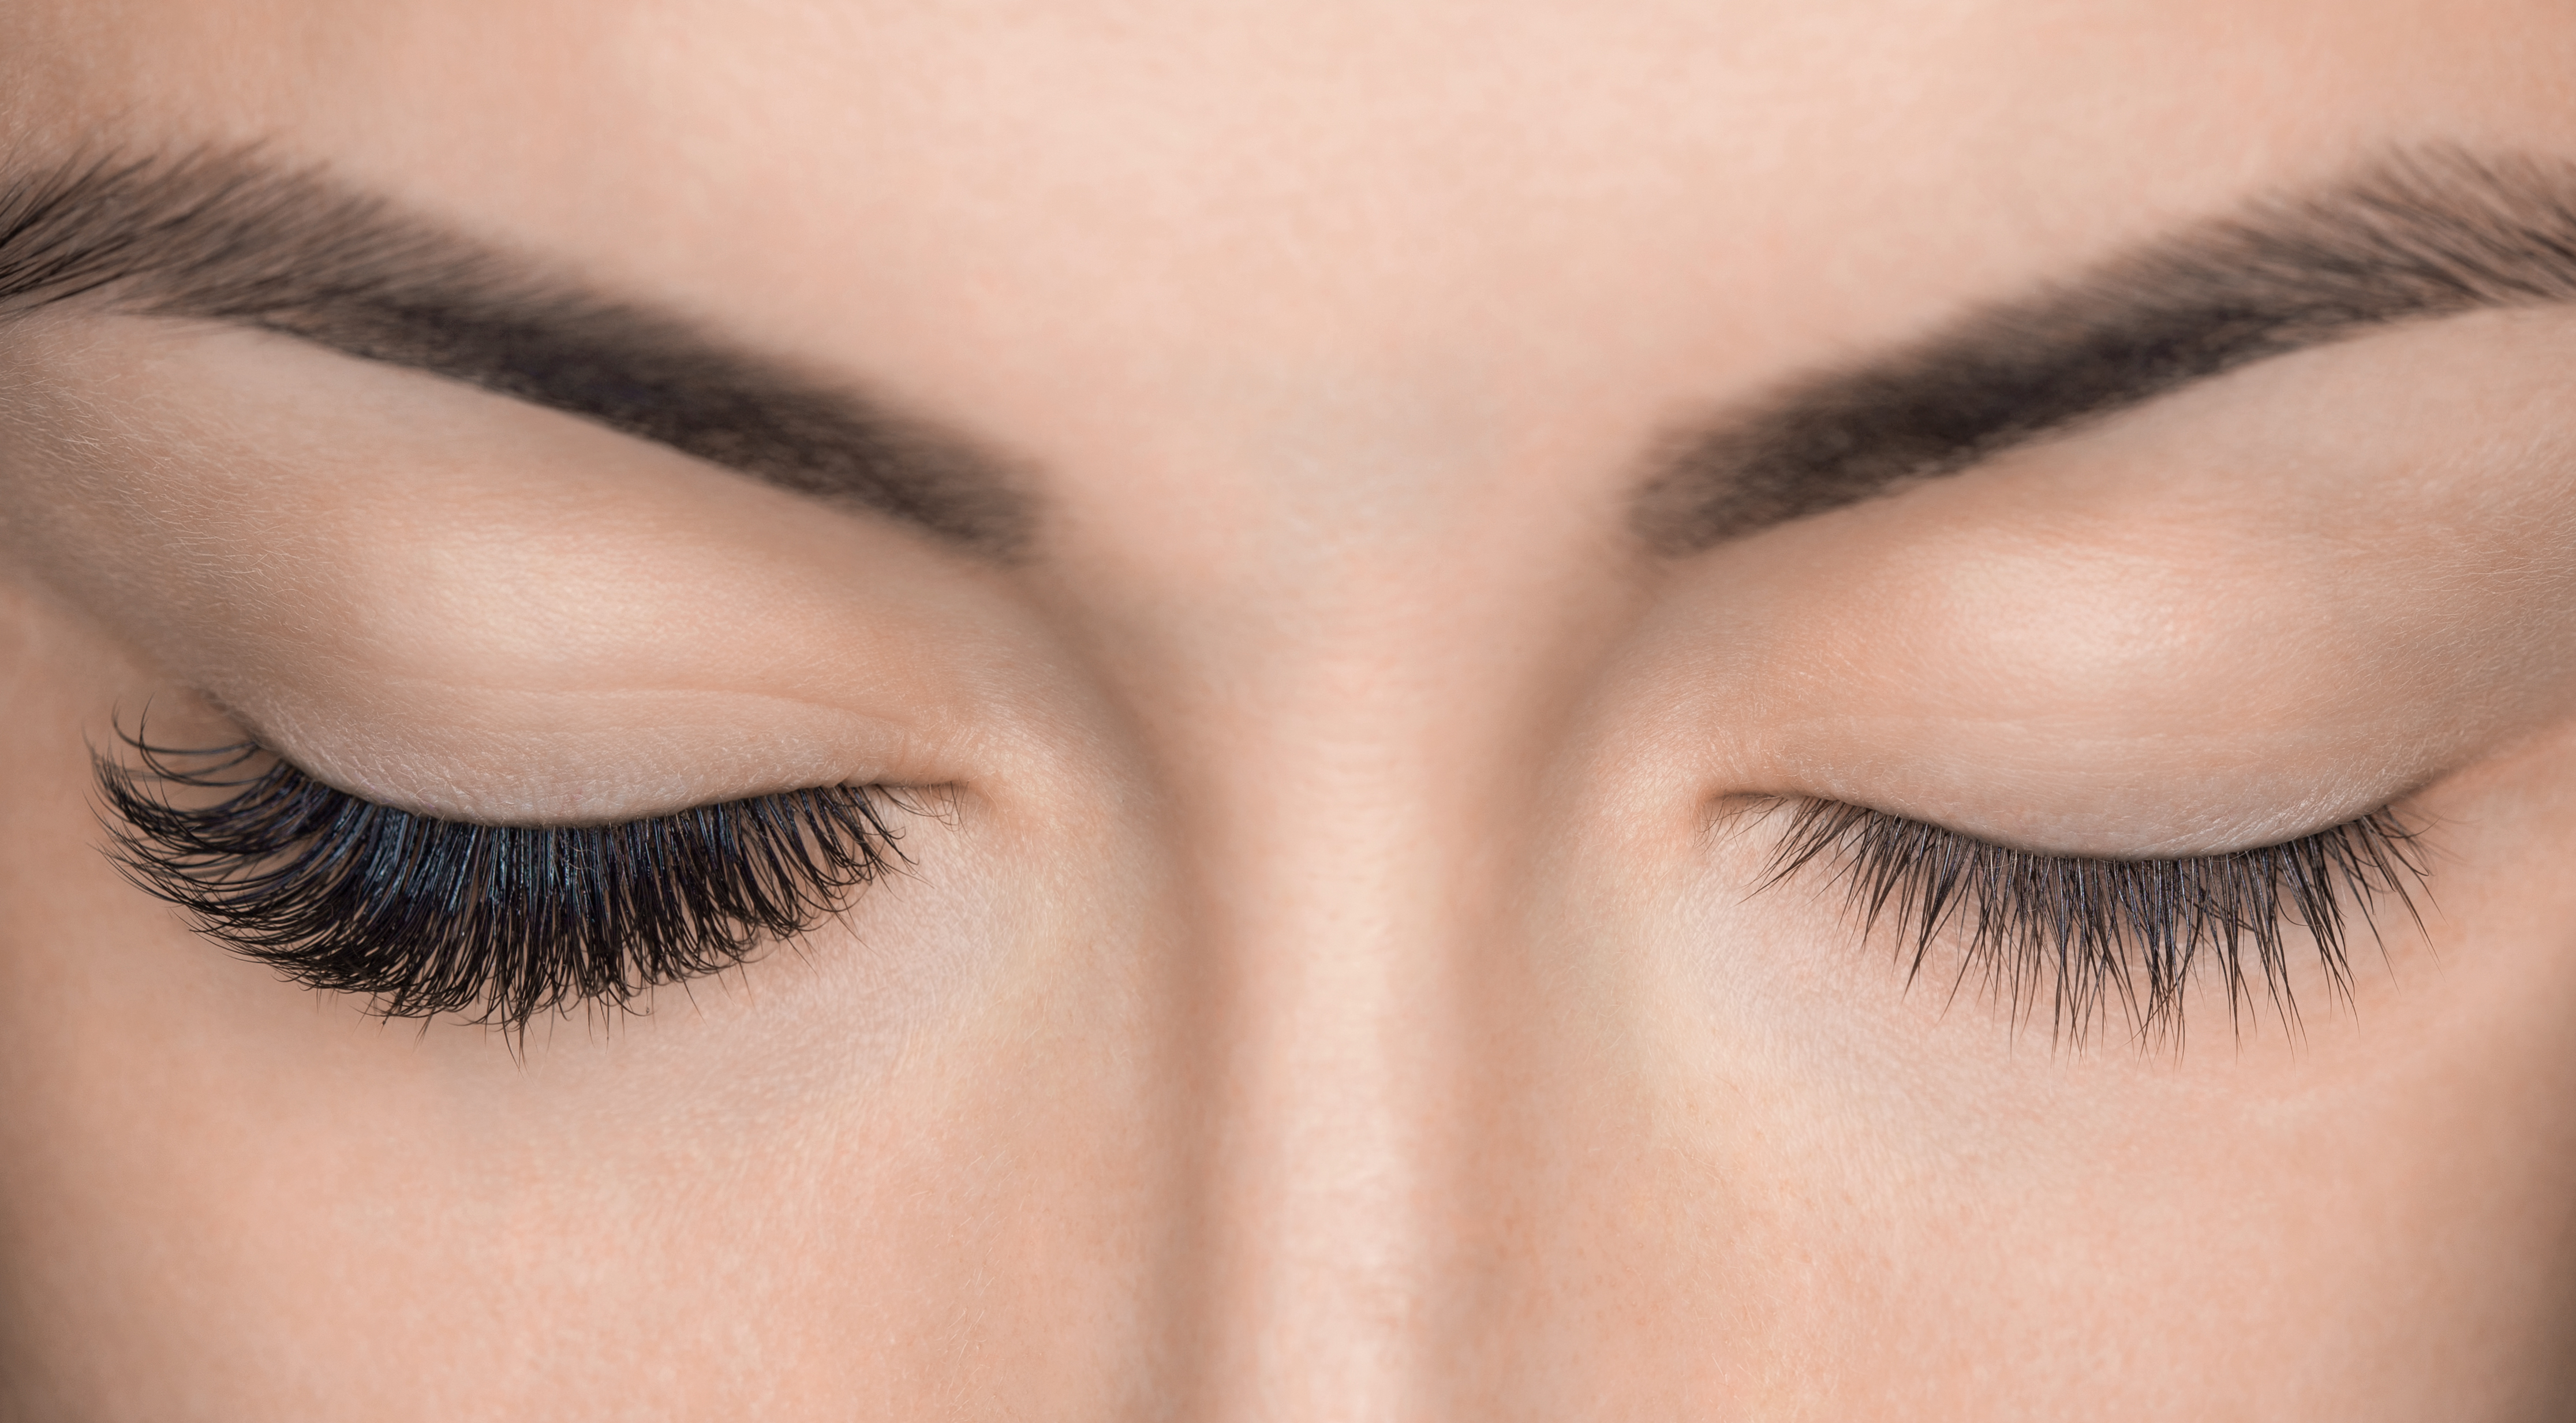 EYELASH EXTENSIONS: A HOT NEW TREND